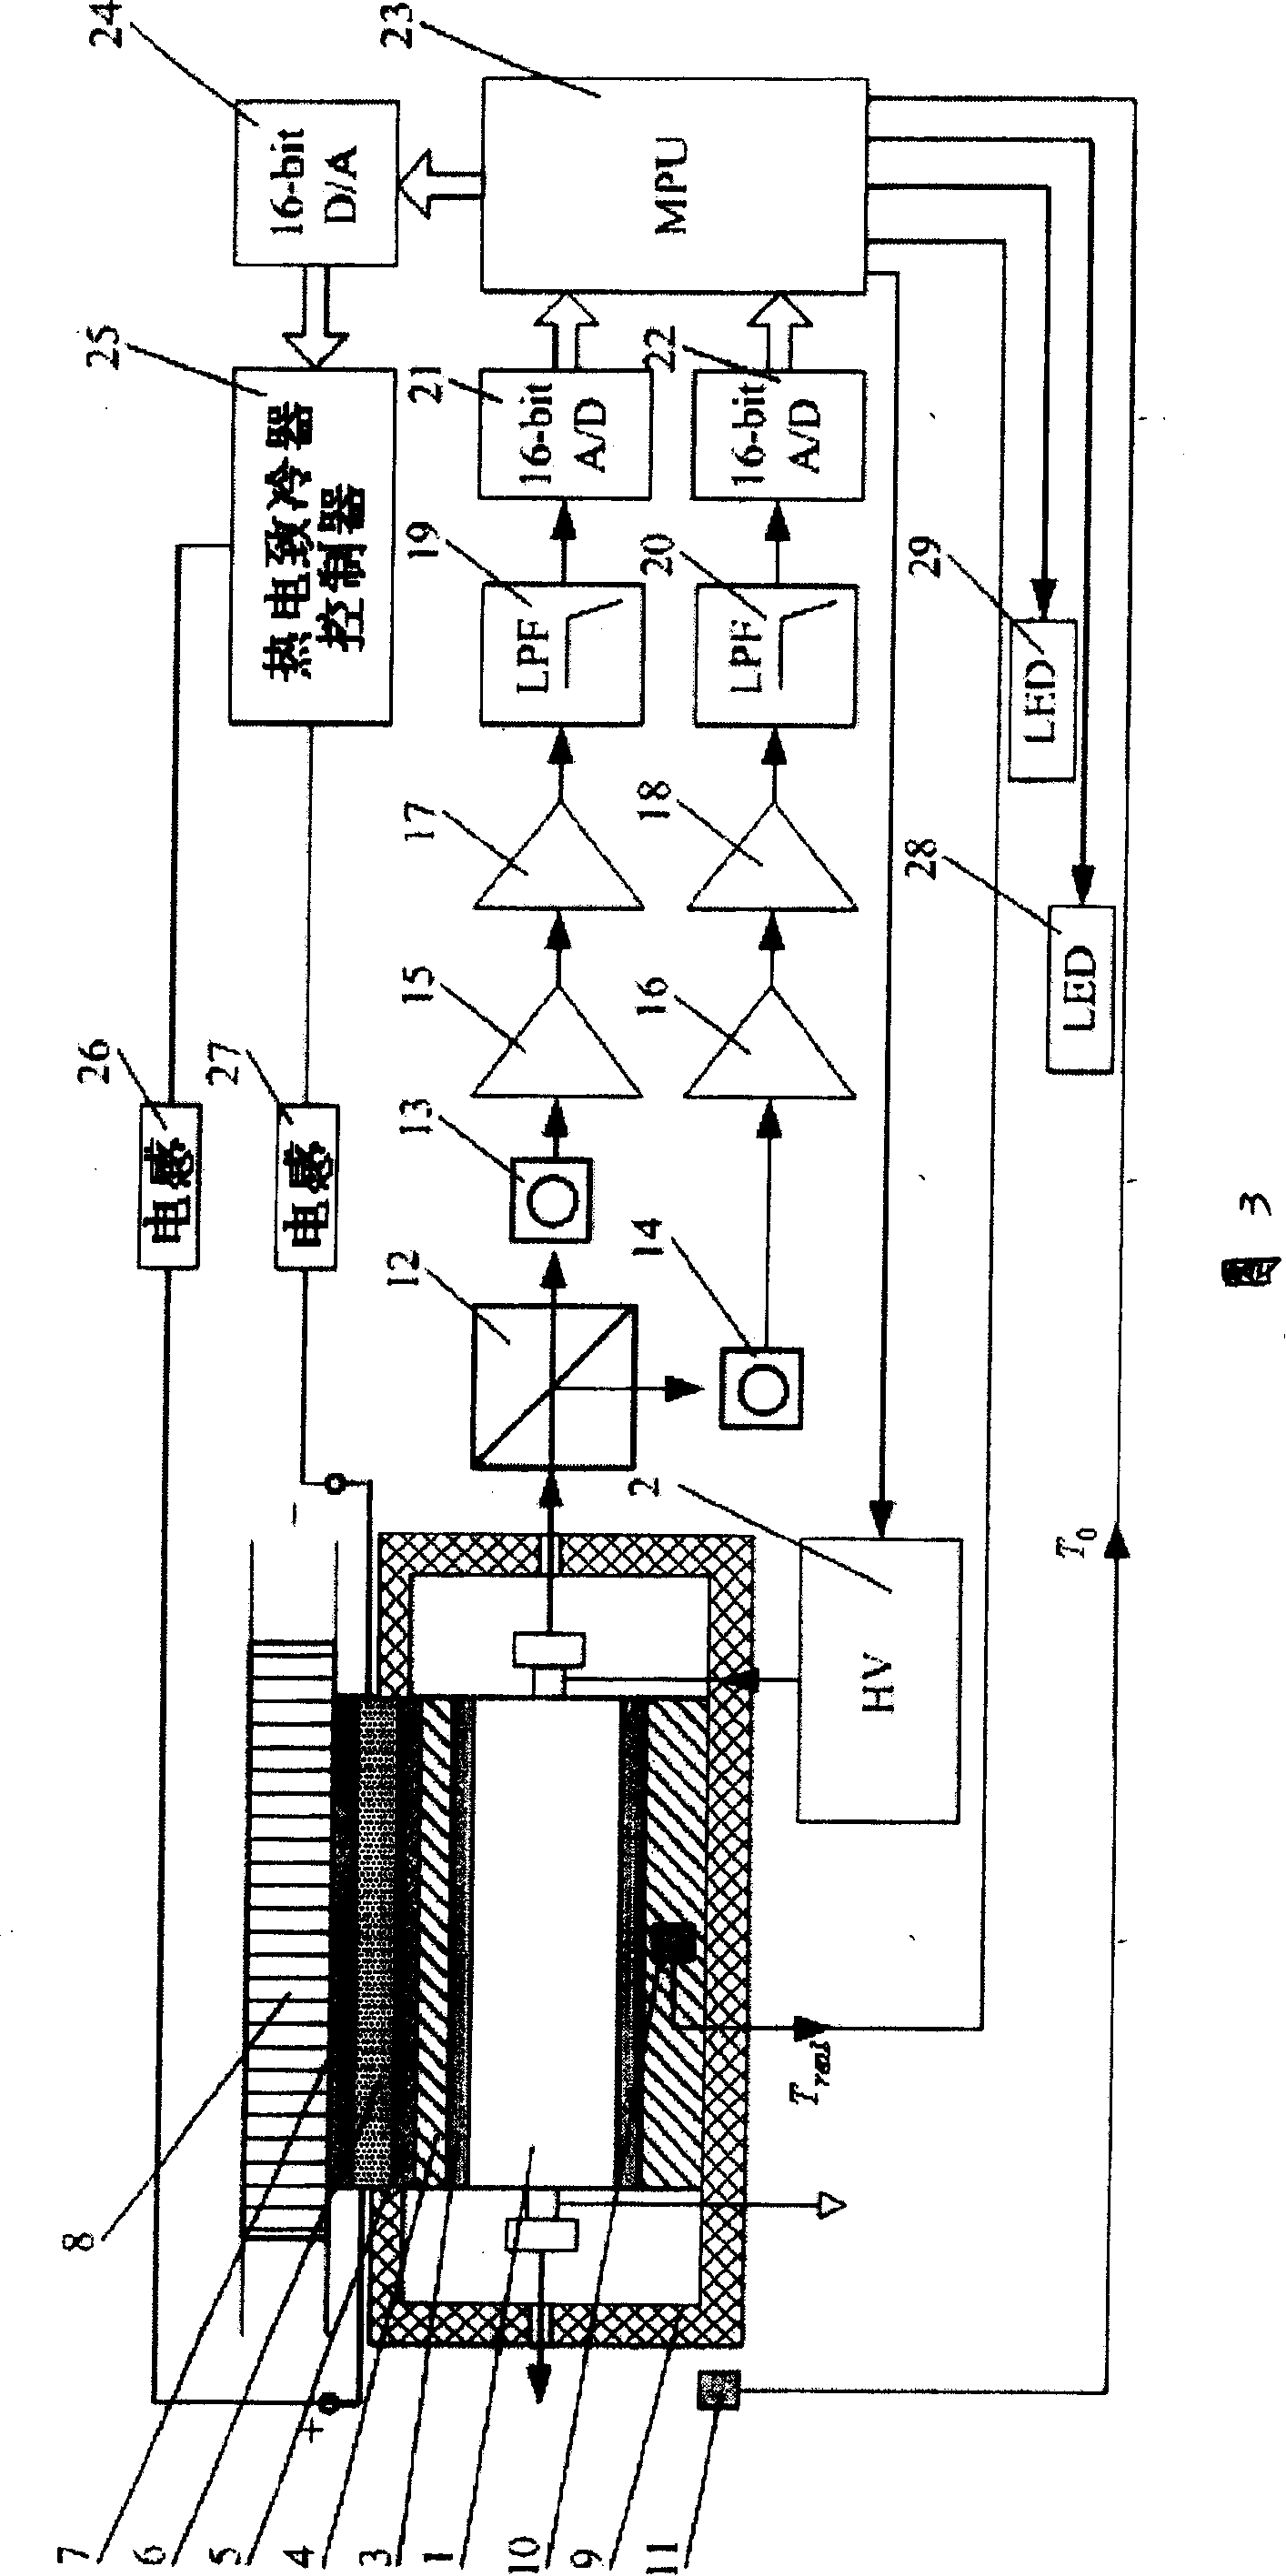 Method and device for stabilizing double-longitudinal mold laser frequency based on thermoelectric cryostat